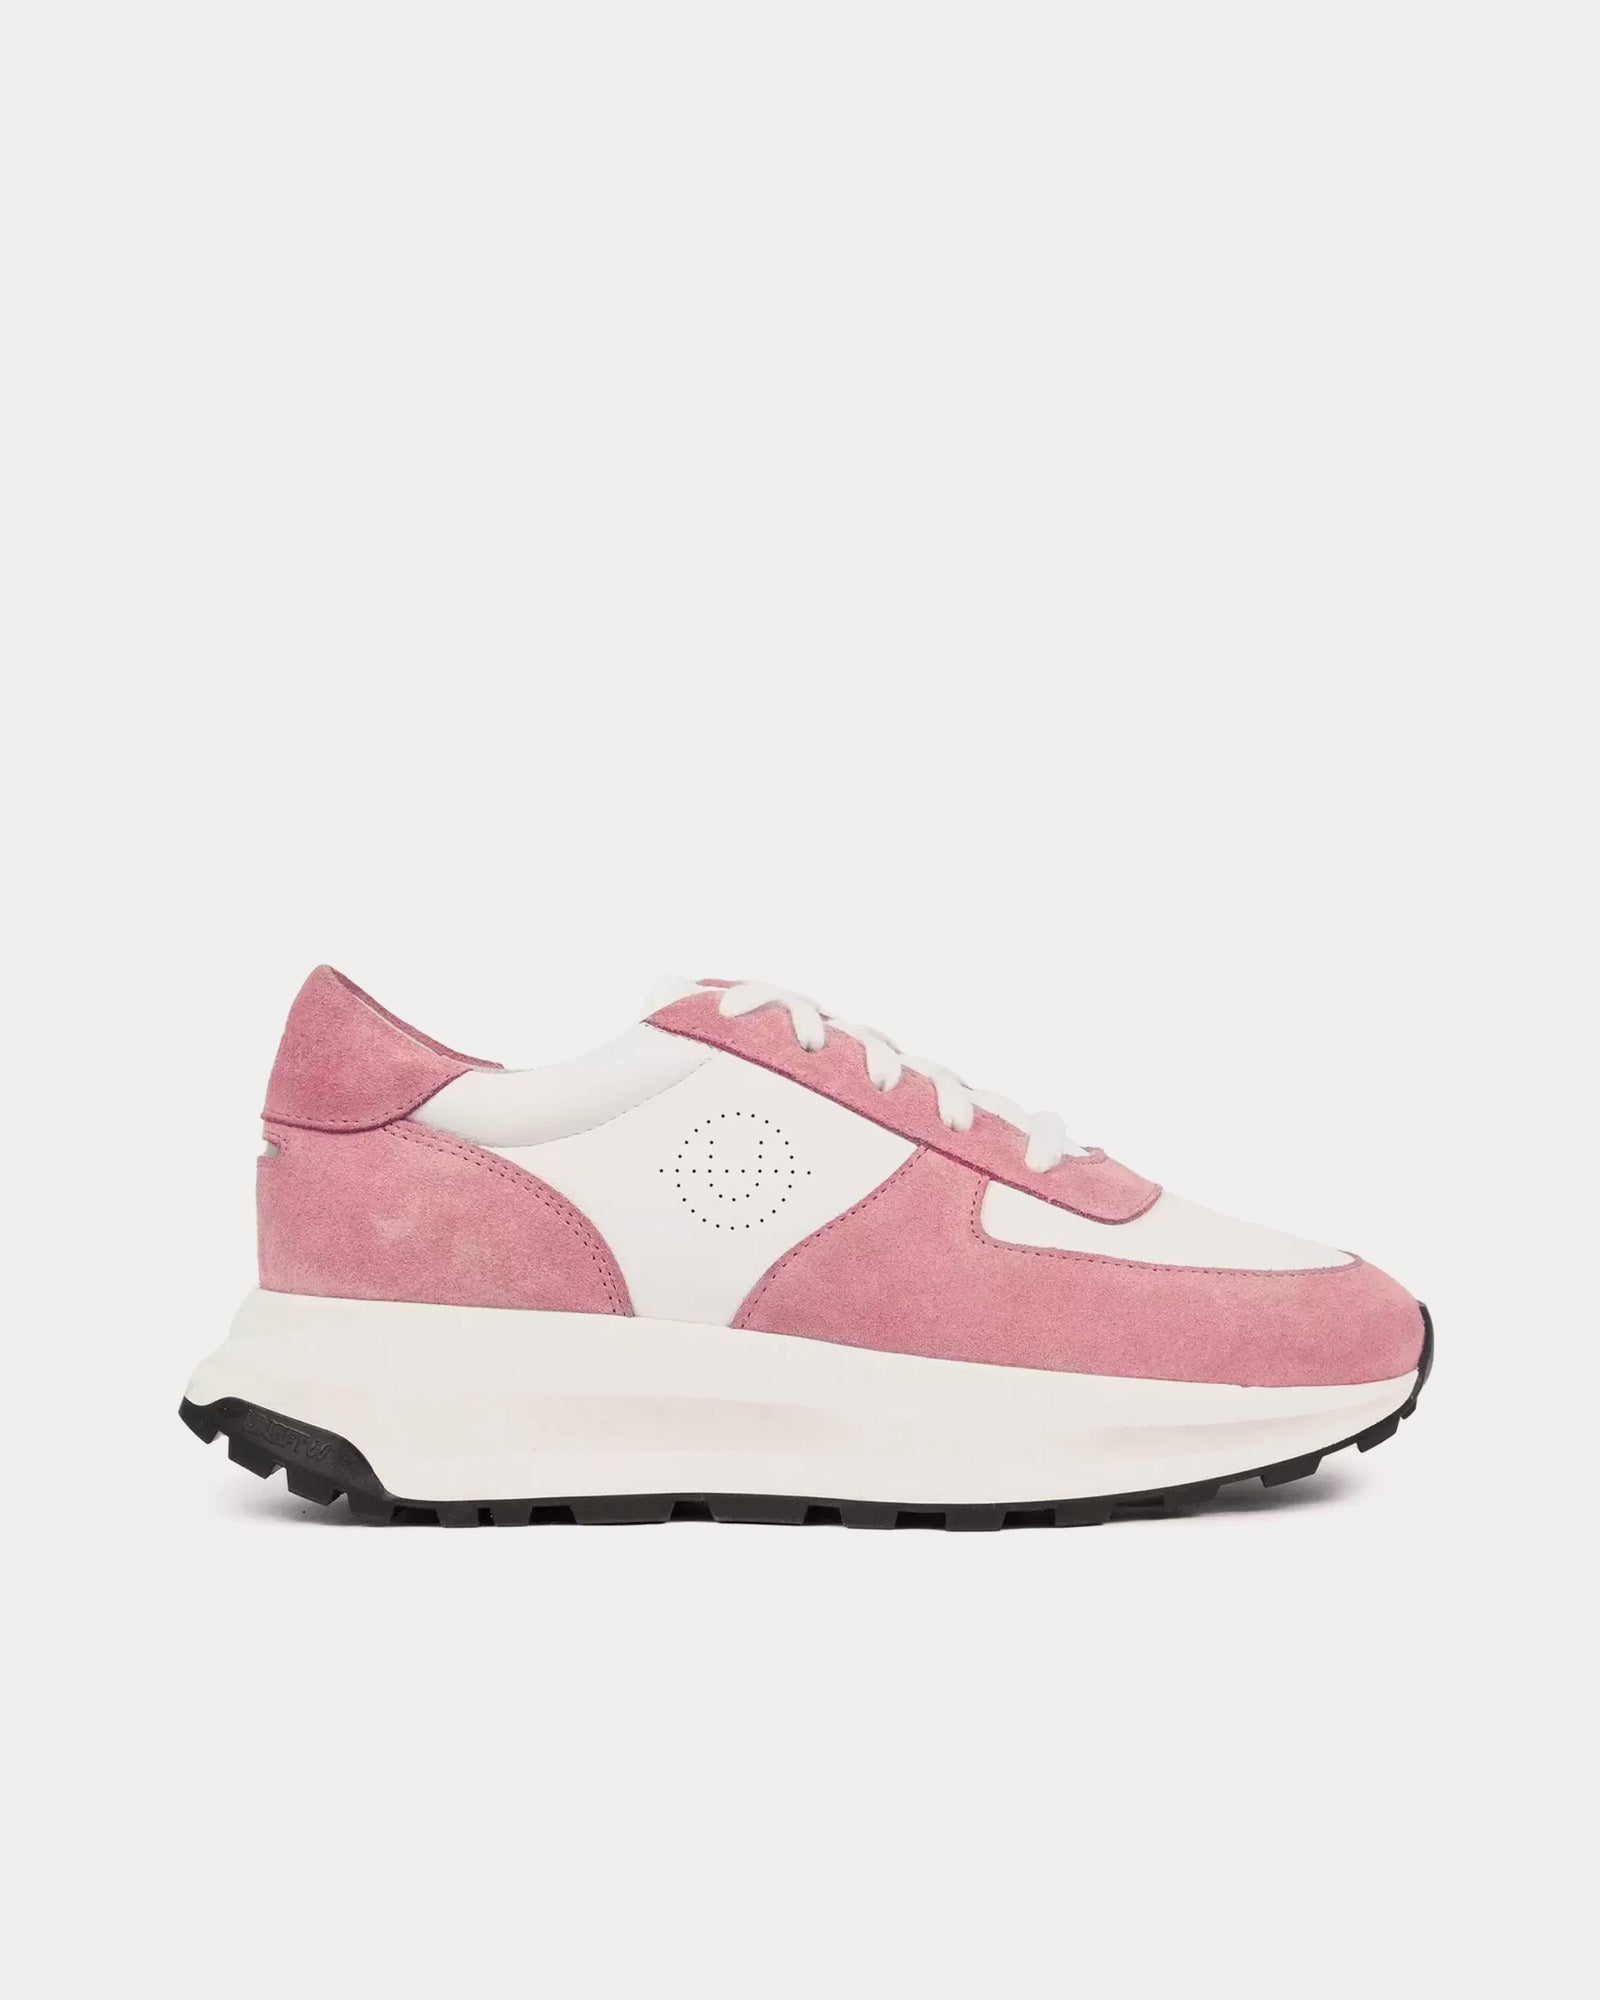 Unseen Footwear - Trinity Leather & Suede Pink / White Low Top Sneakers